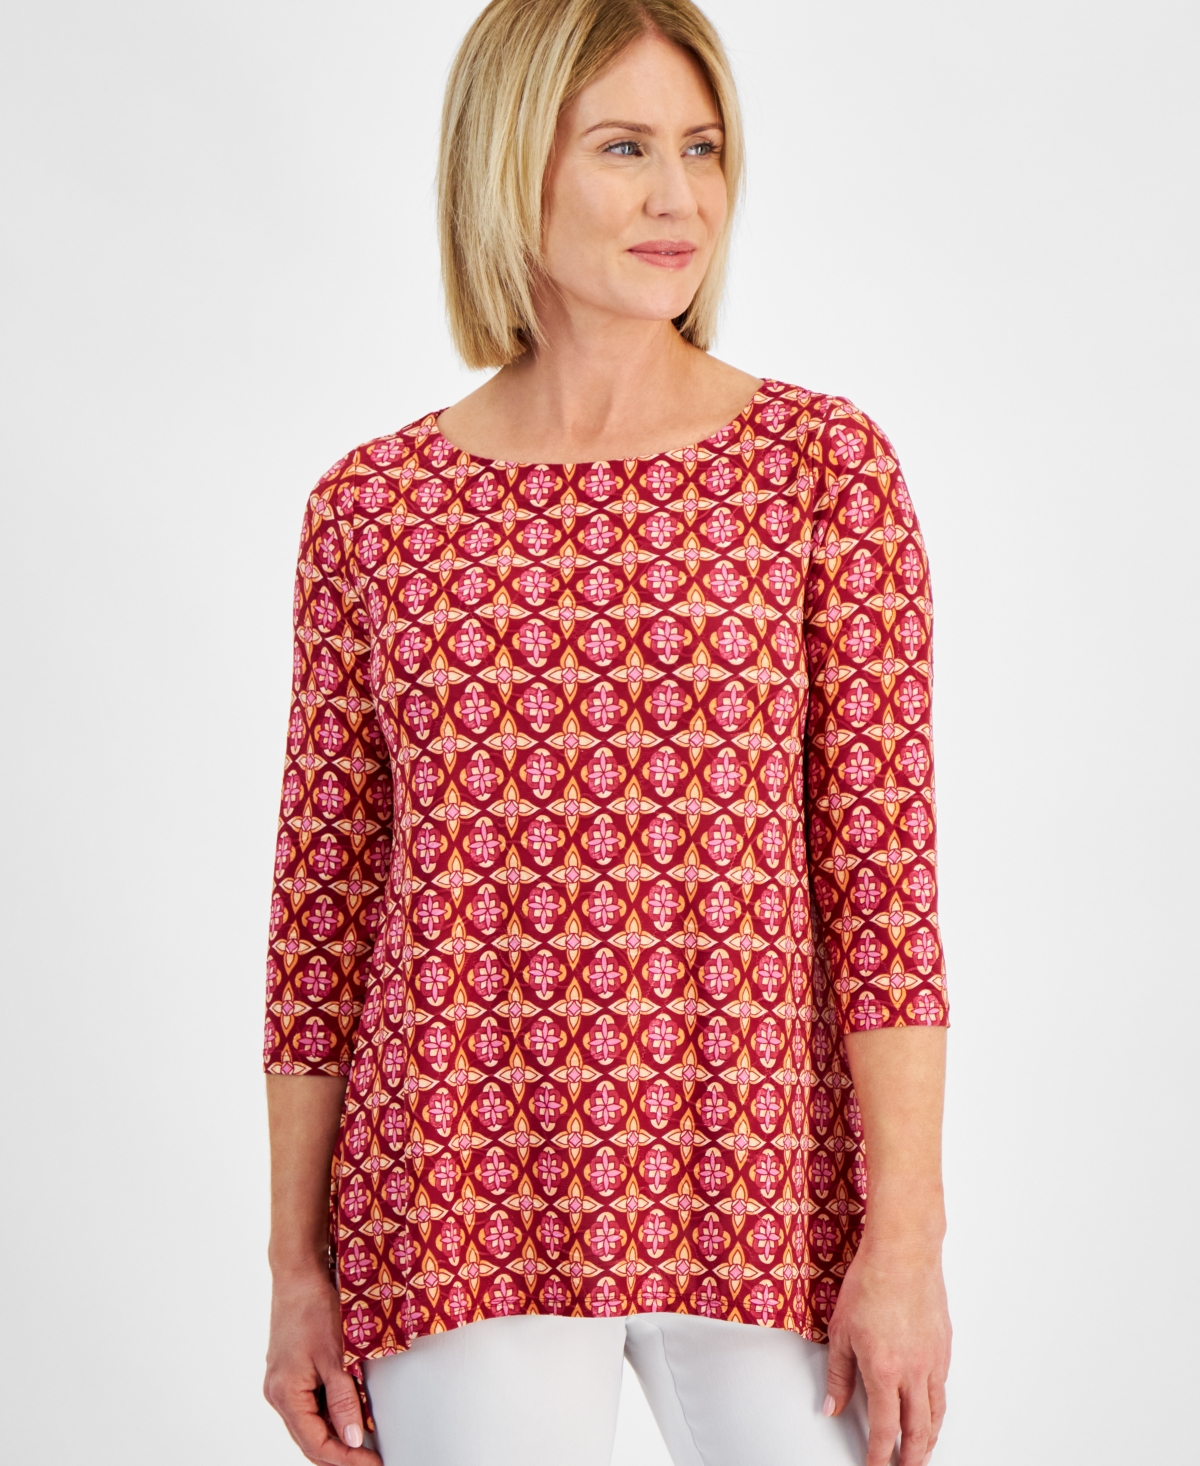 Petite Francesca Foulard Printed Jacquard 3/4-Sleeve Swing Top, Created for Macy's - Ruby Slippers Combo